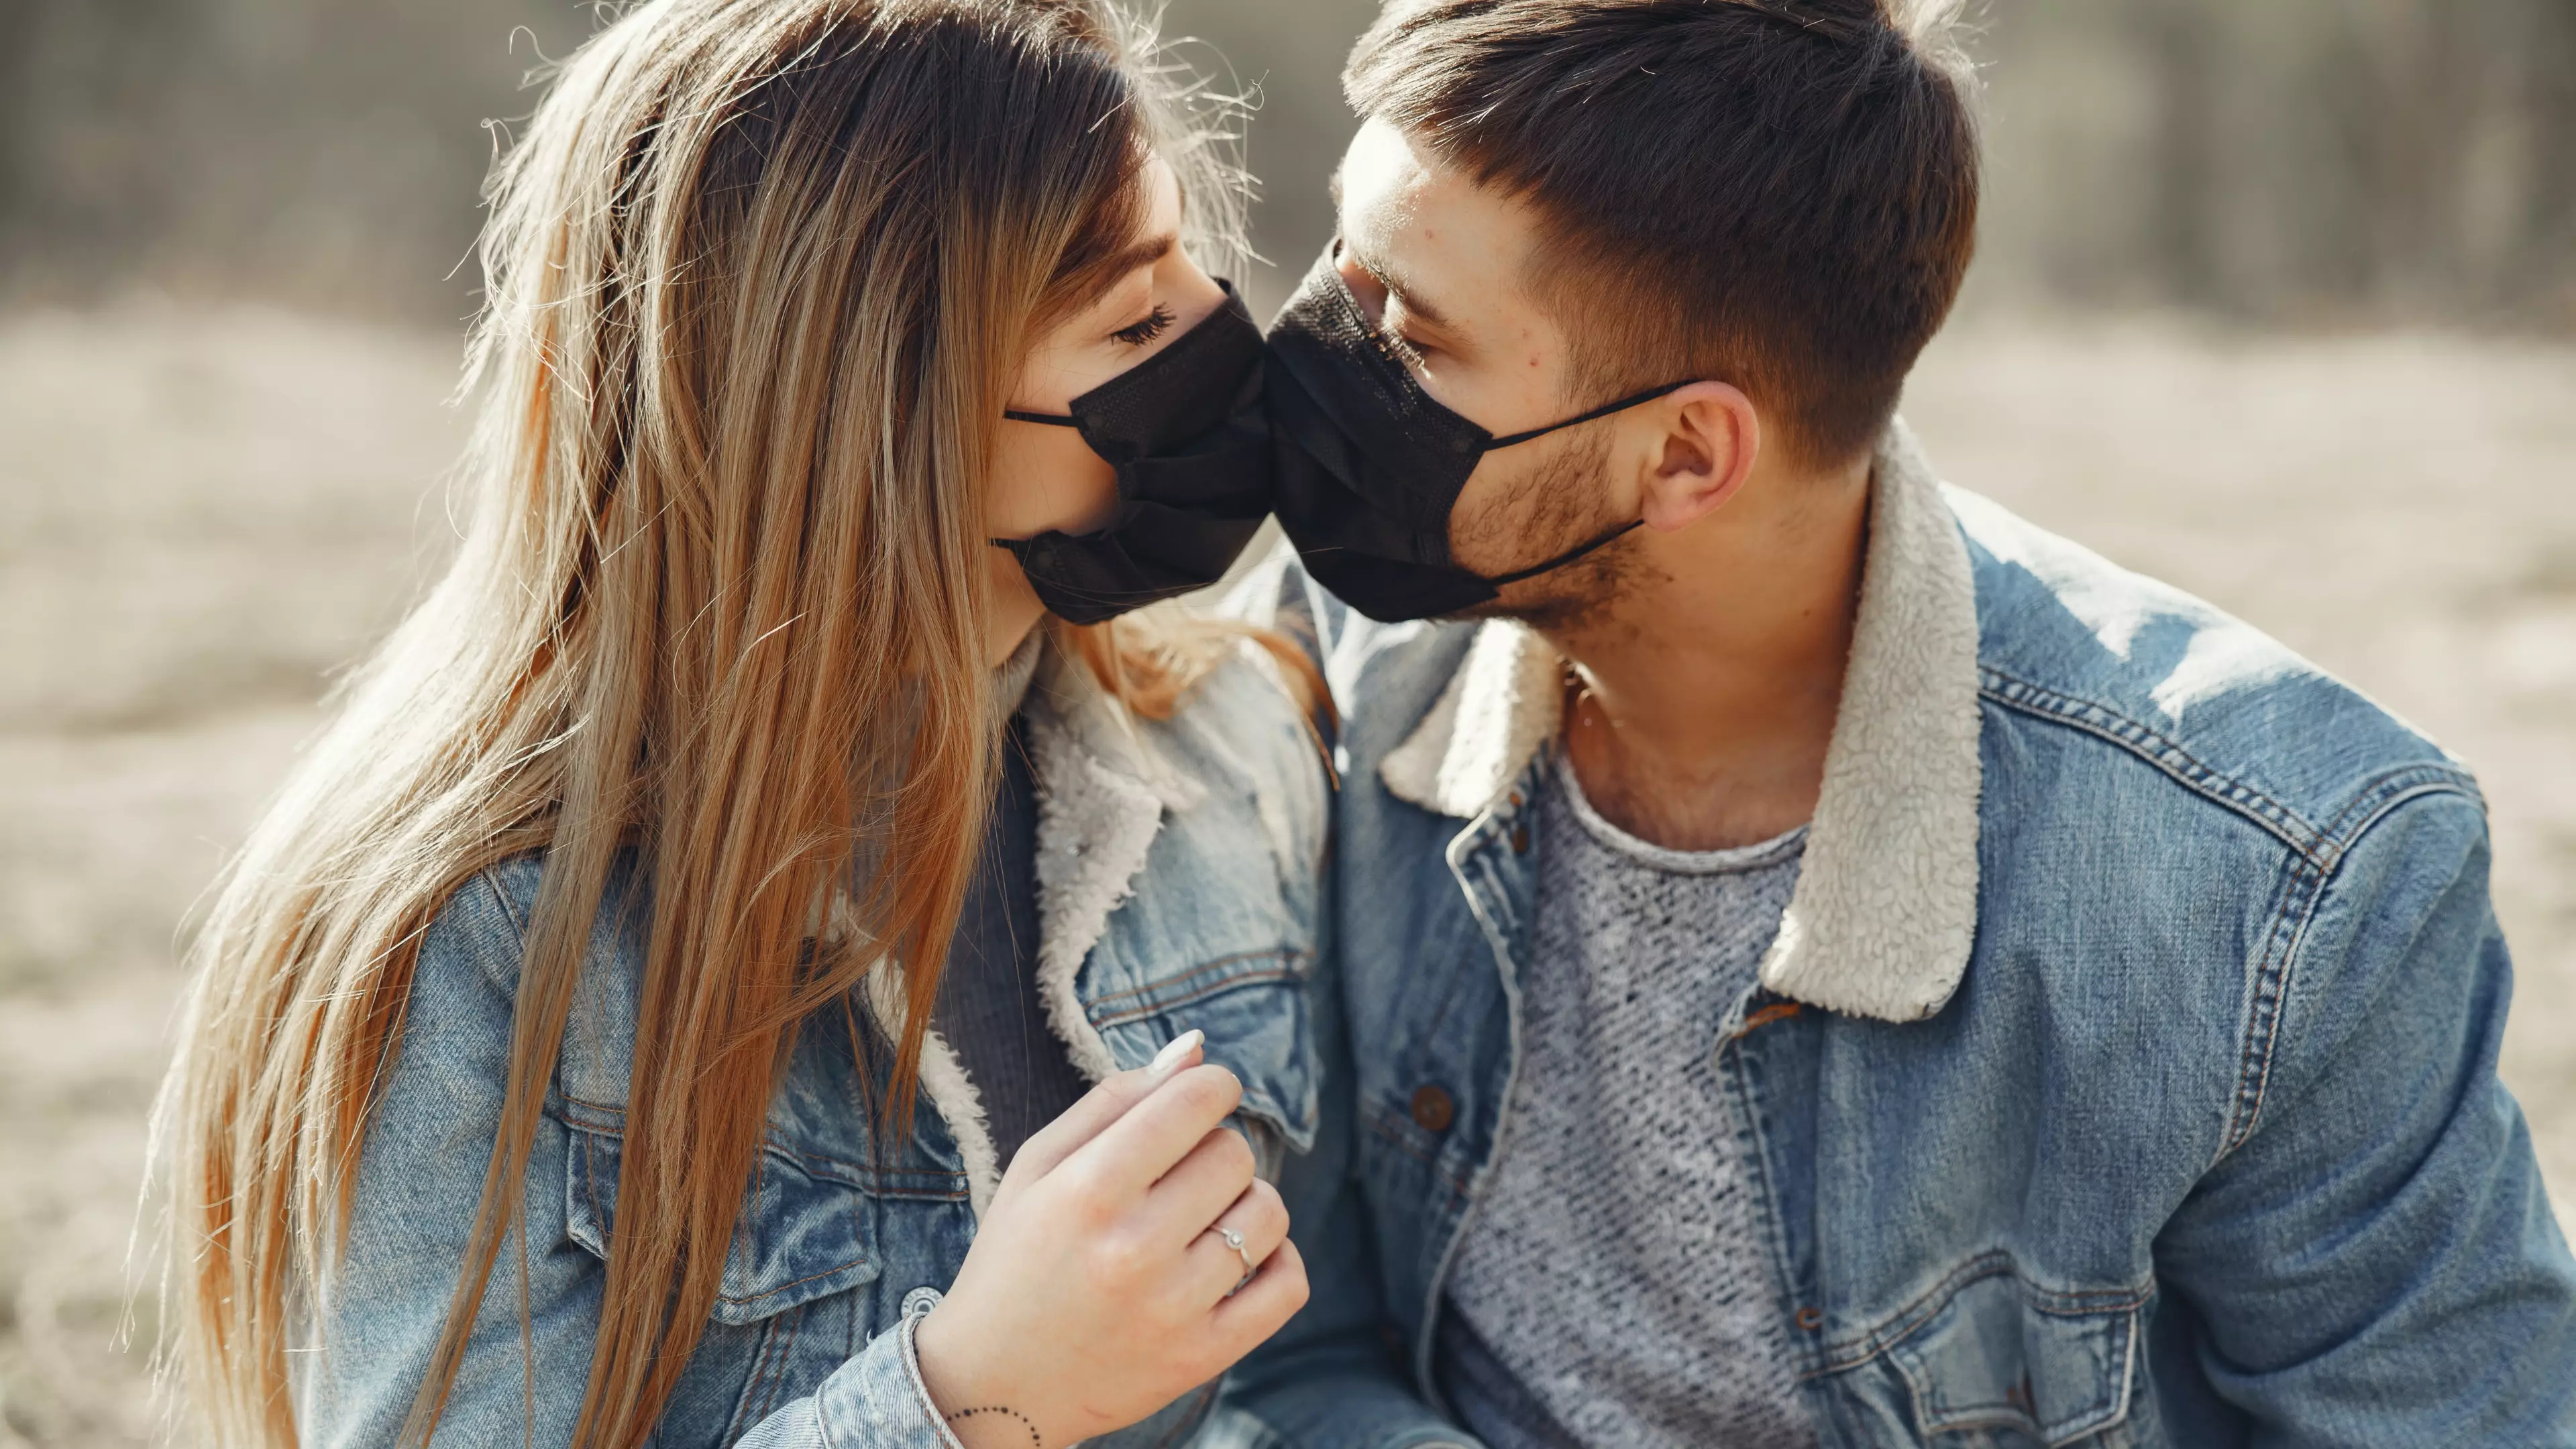 Couples Should Wear Face Masks When Having Sex To Cut Spread Of Coronavirus, Experts Say